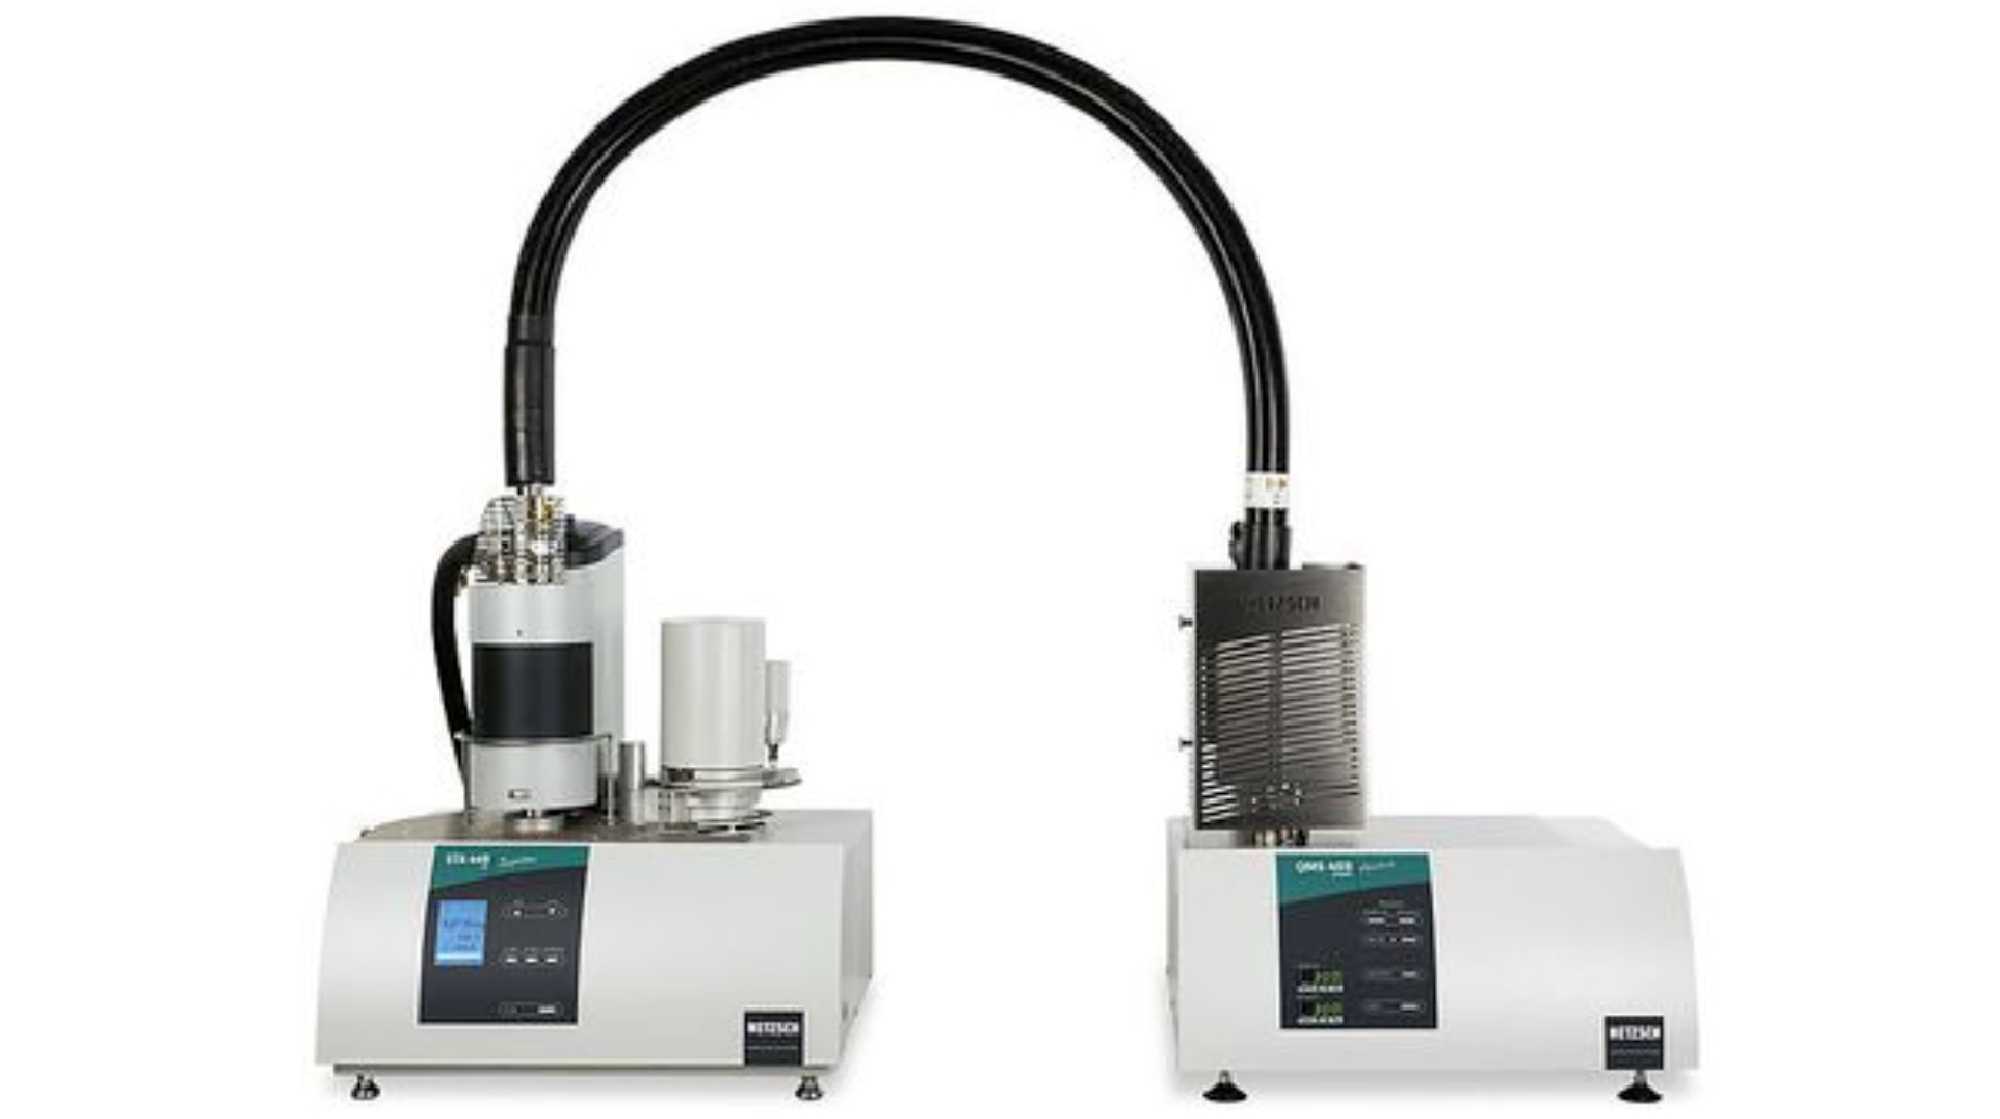 Enlarged view: Netzsch TGA/DSC-MS used for various solid materials characterization.